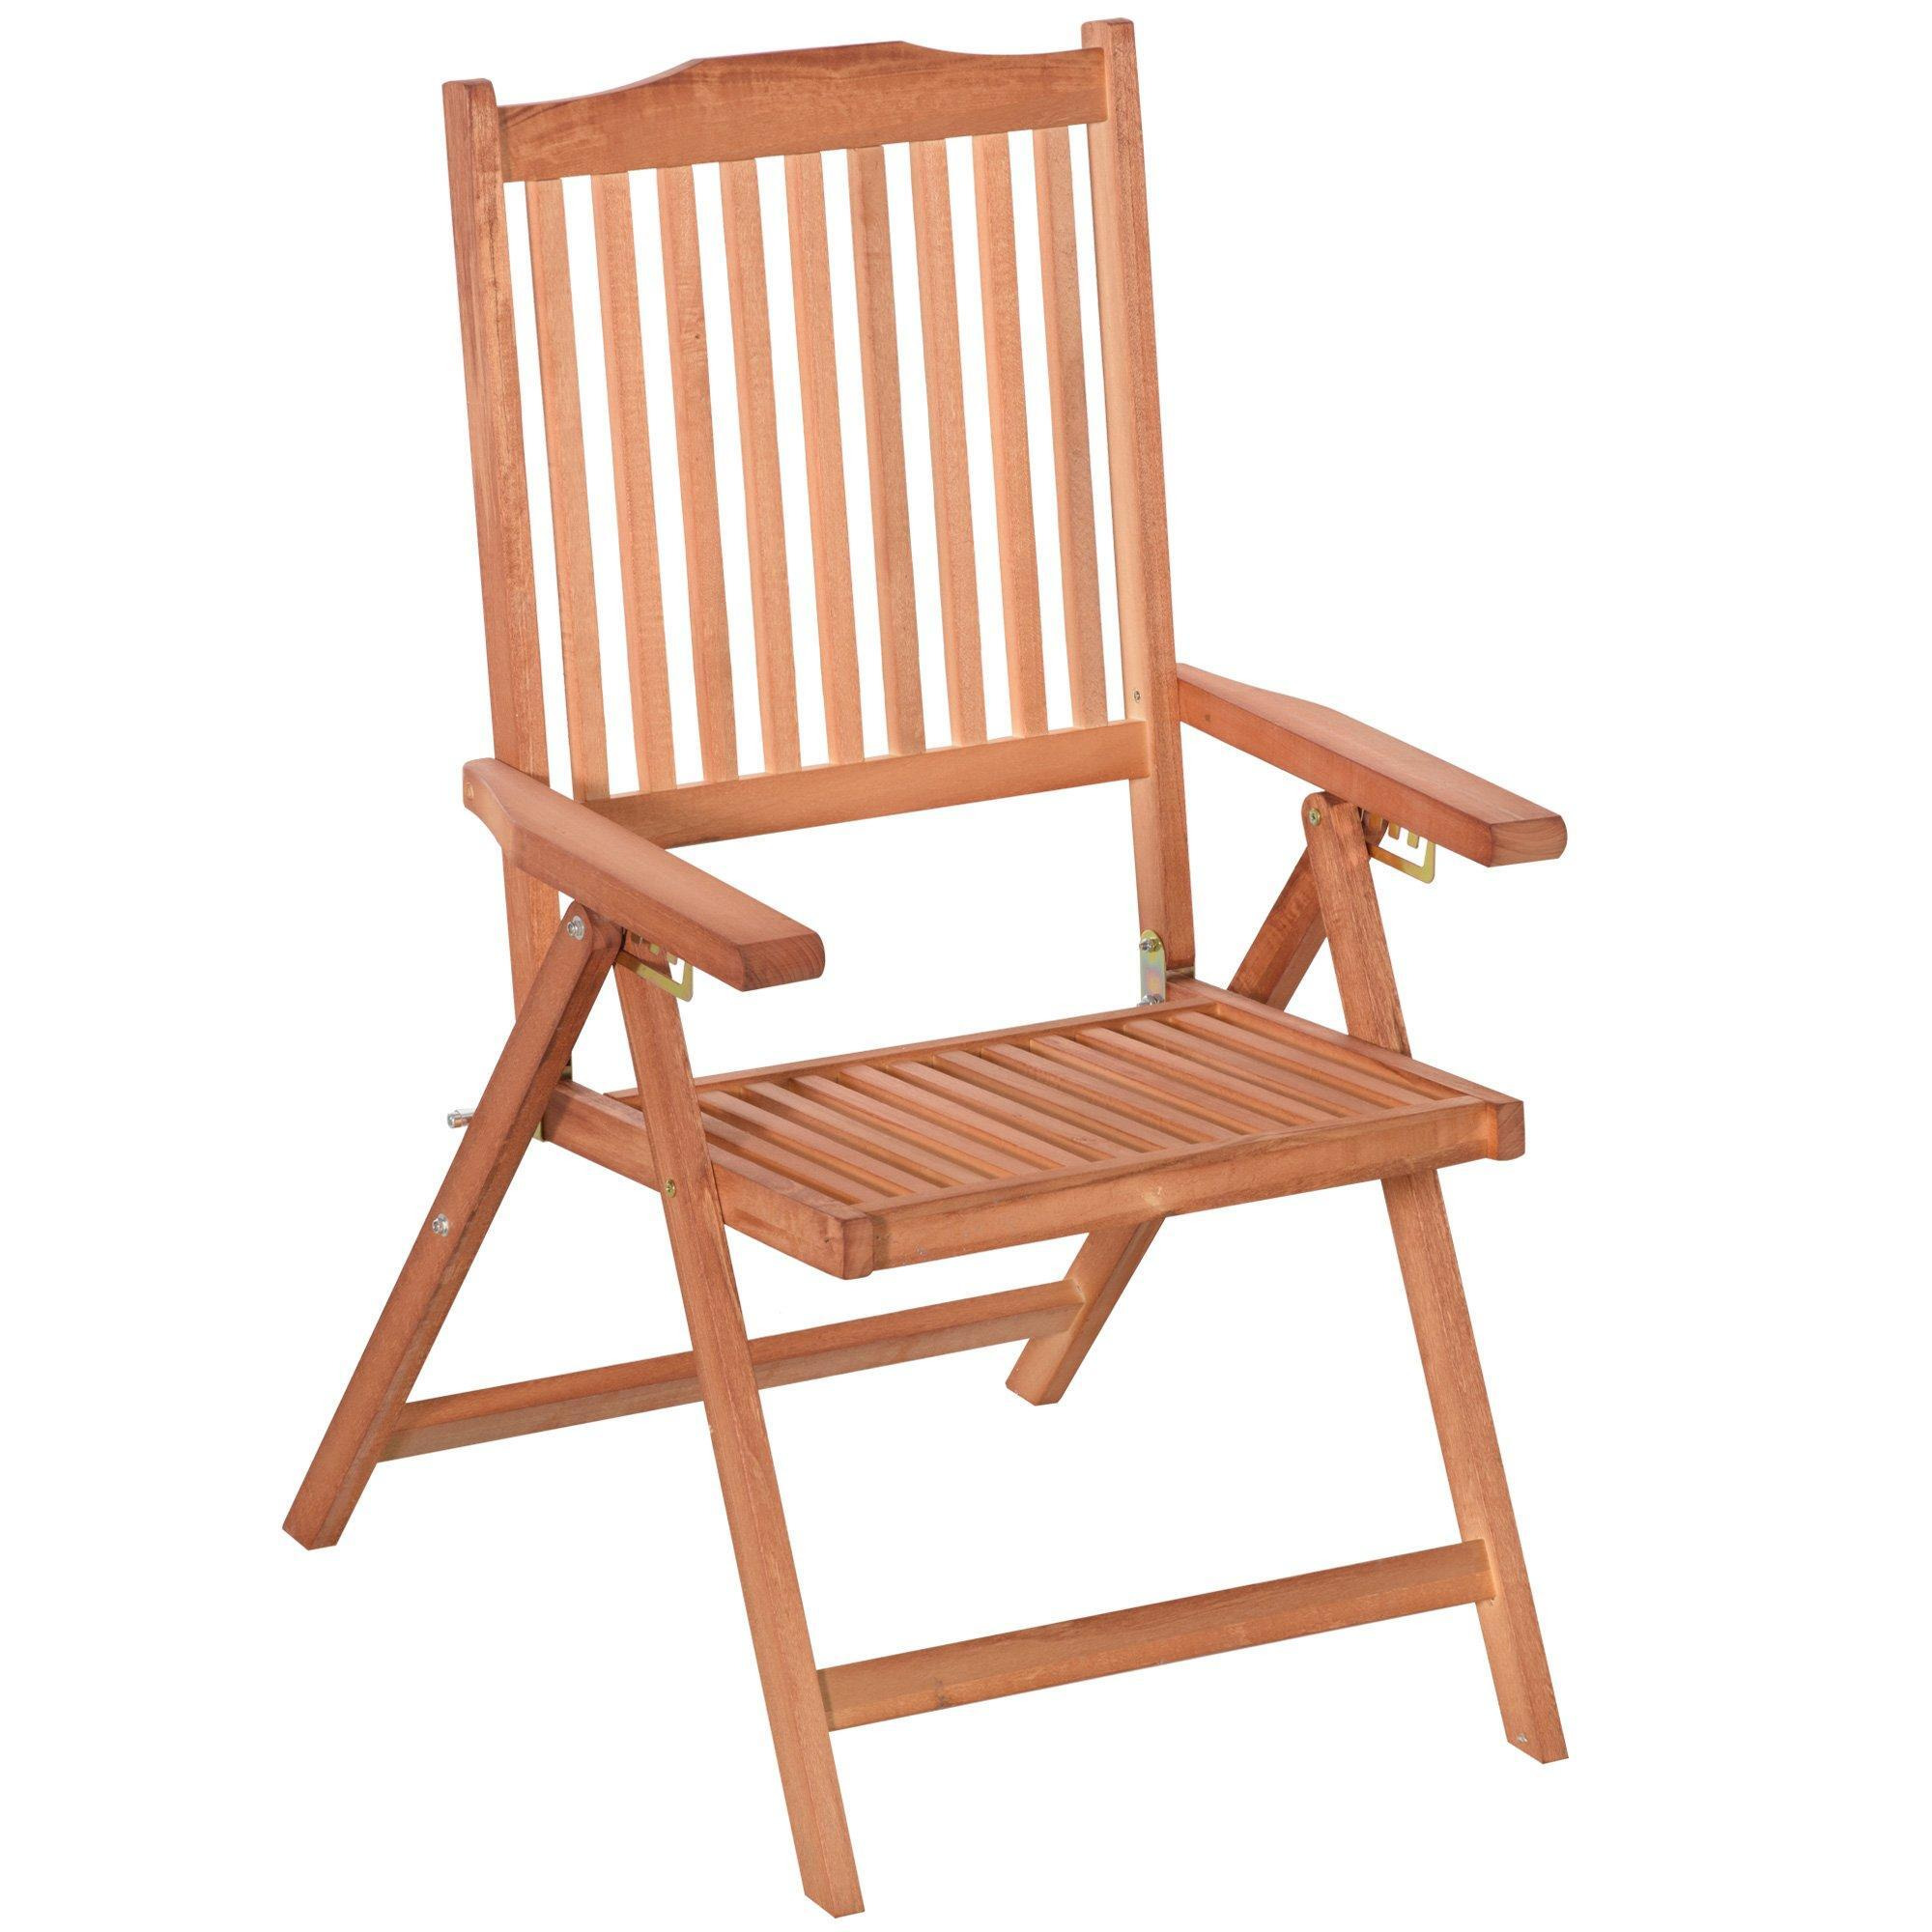 5-Position Acacia Wood Chair Folding Recliner Dining Seat Garden - image 1